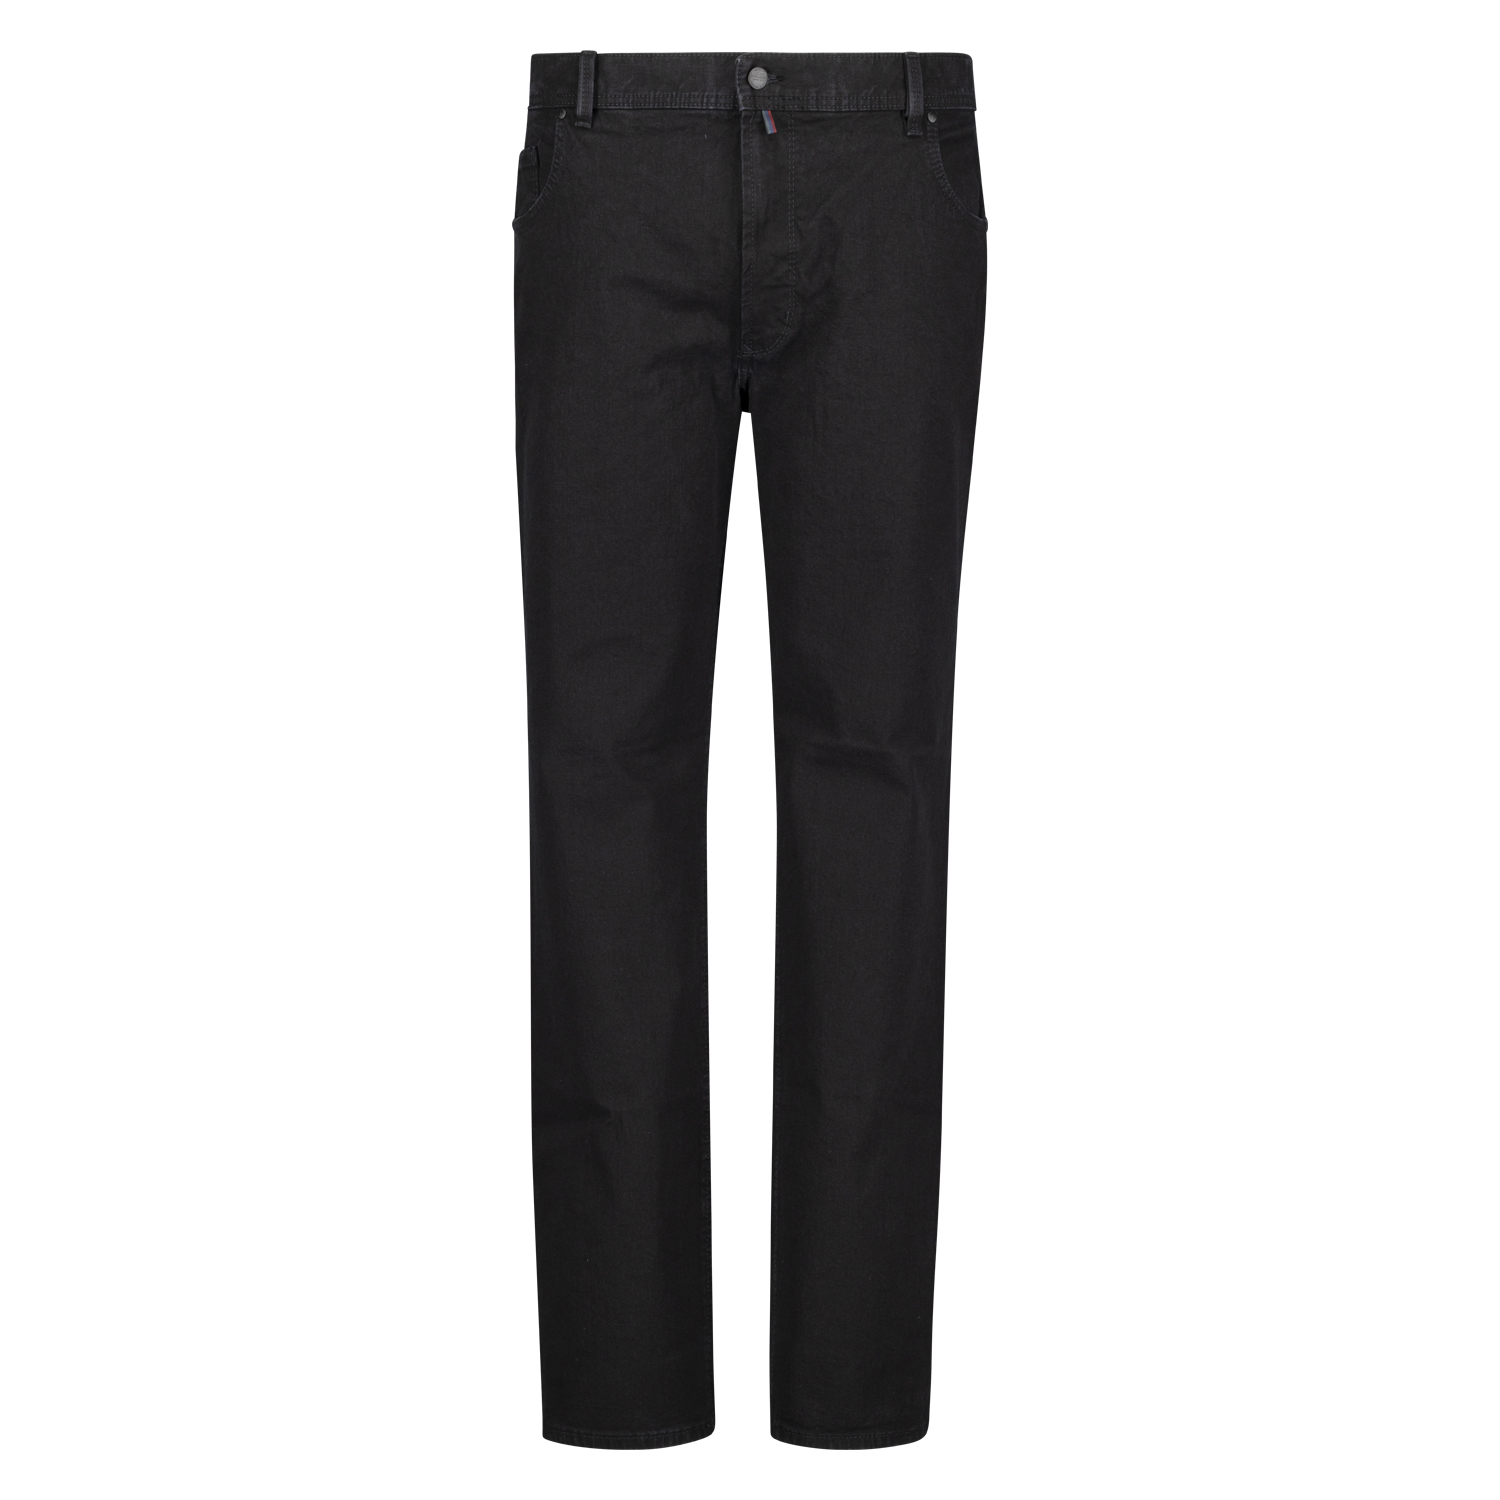 5-Pocket Jeans homme avec stretch "Peter" noir by Pioneer grandes tailles (Taille normale): 56 - 74